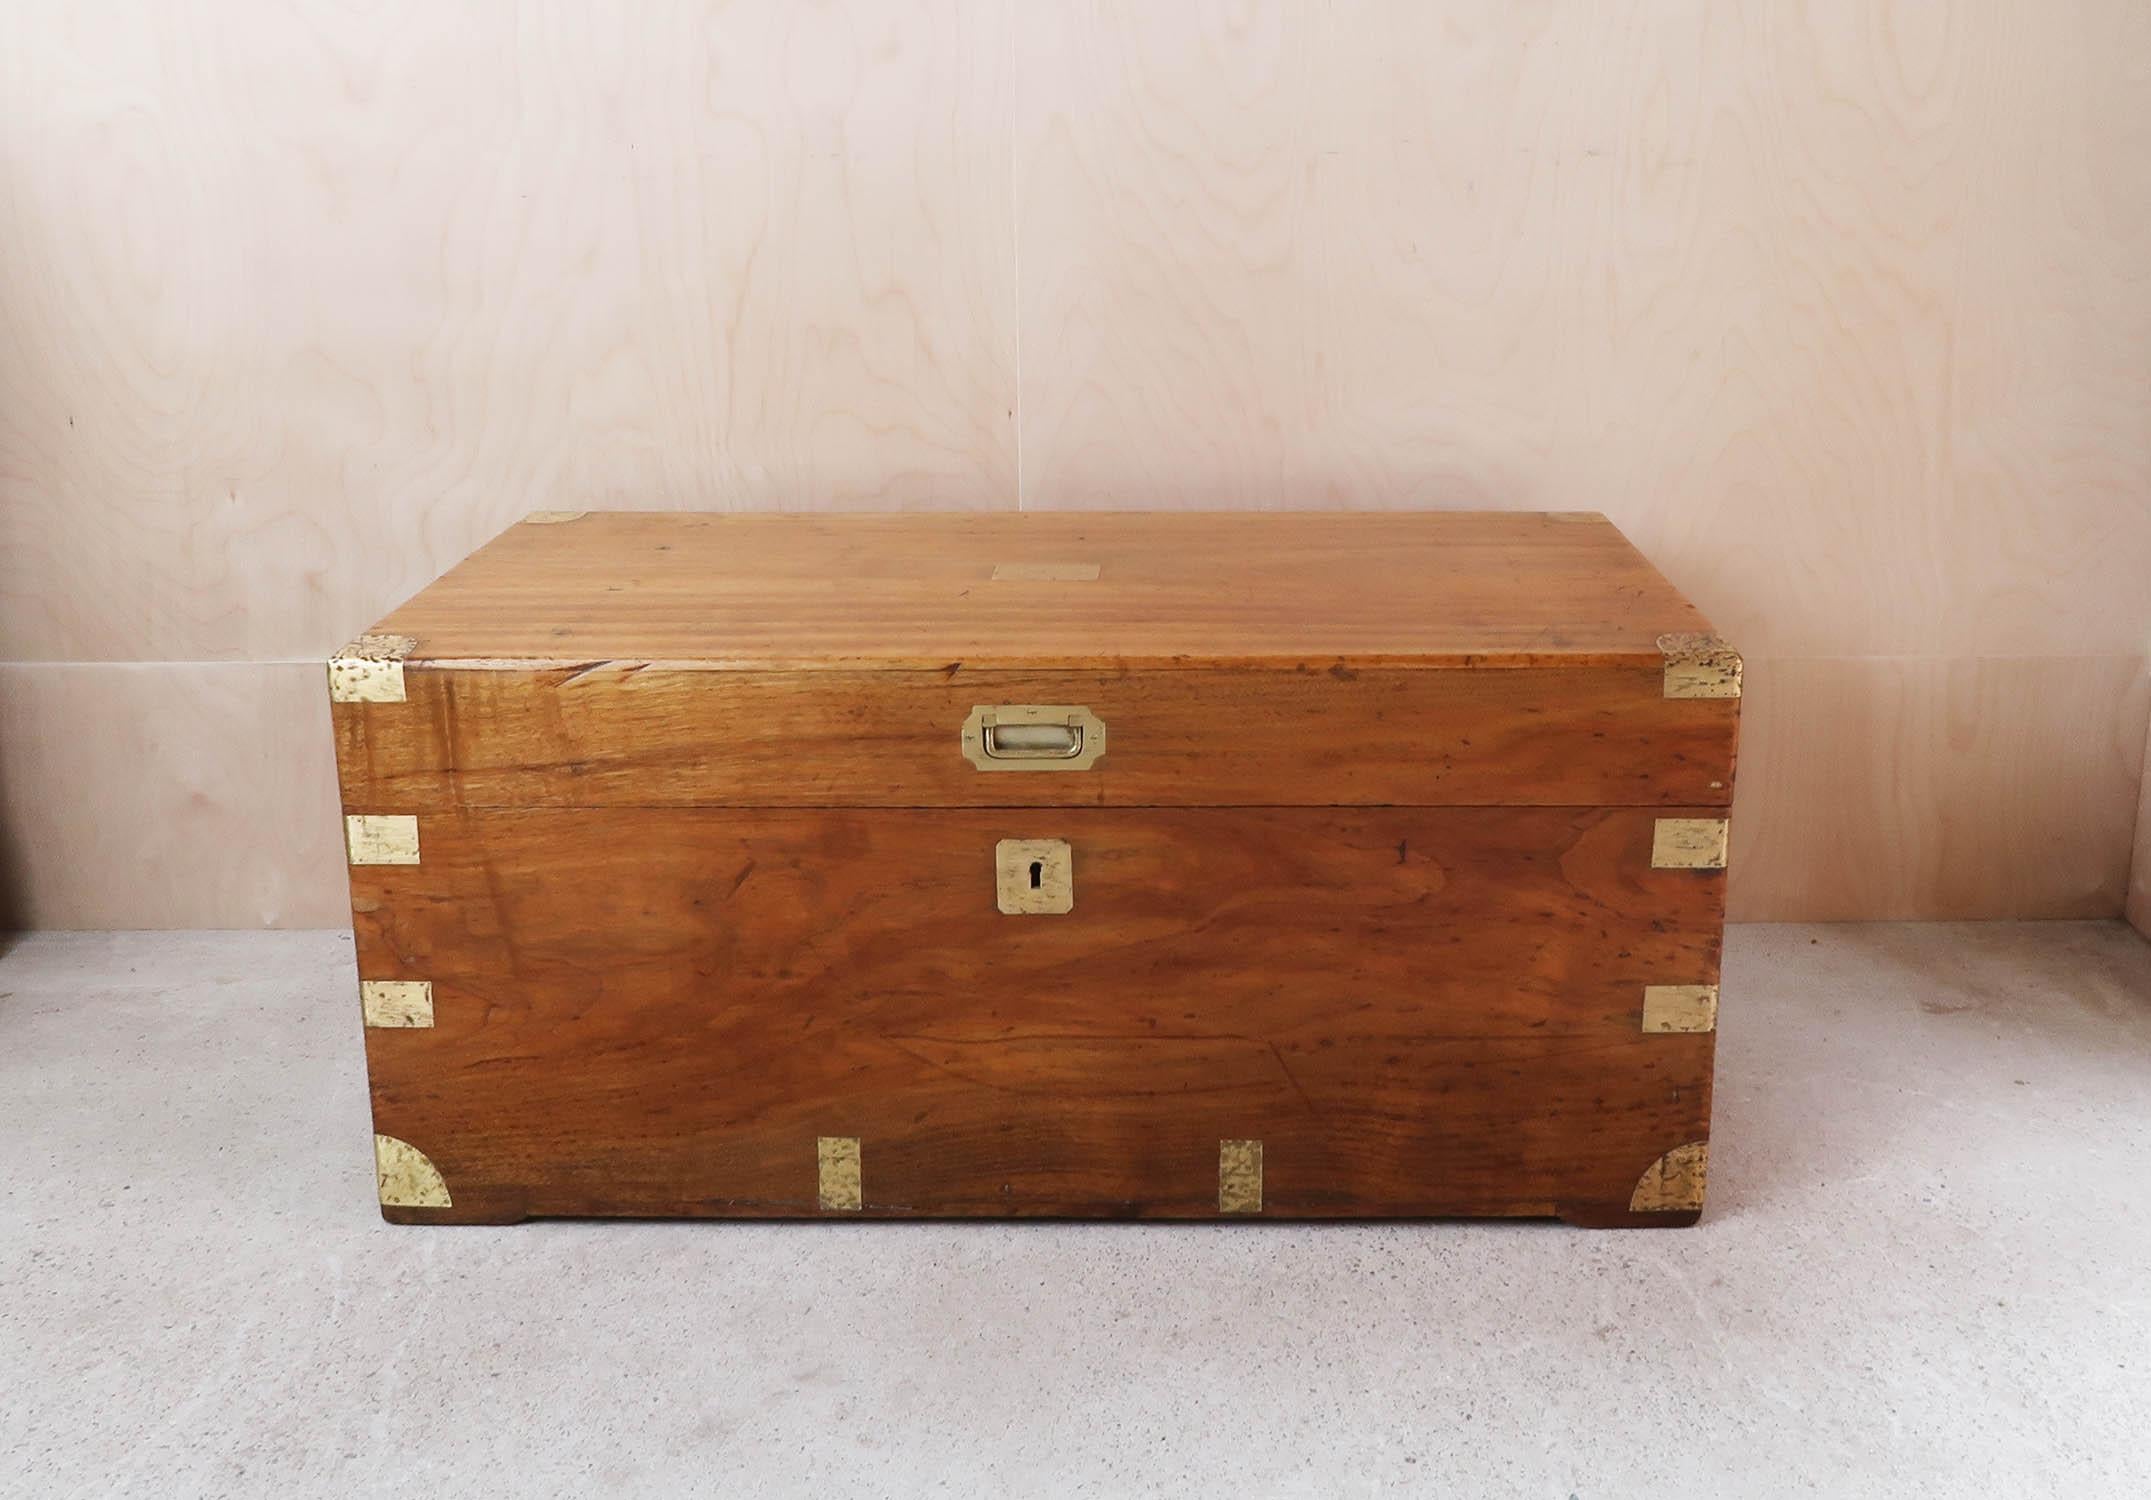 Superb camphor chest

Originally used as a travel trunk possibly on a naval or military campaign

Makes a great coffee table

Wonderful colour and figure to the wood

Original brass hardware










